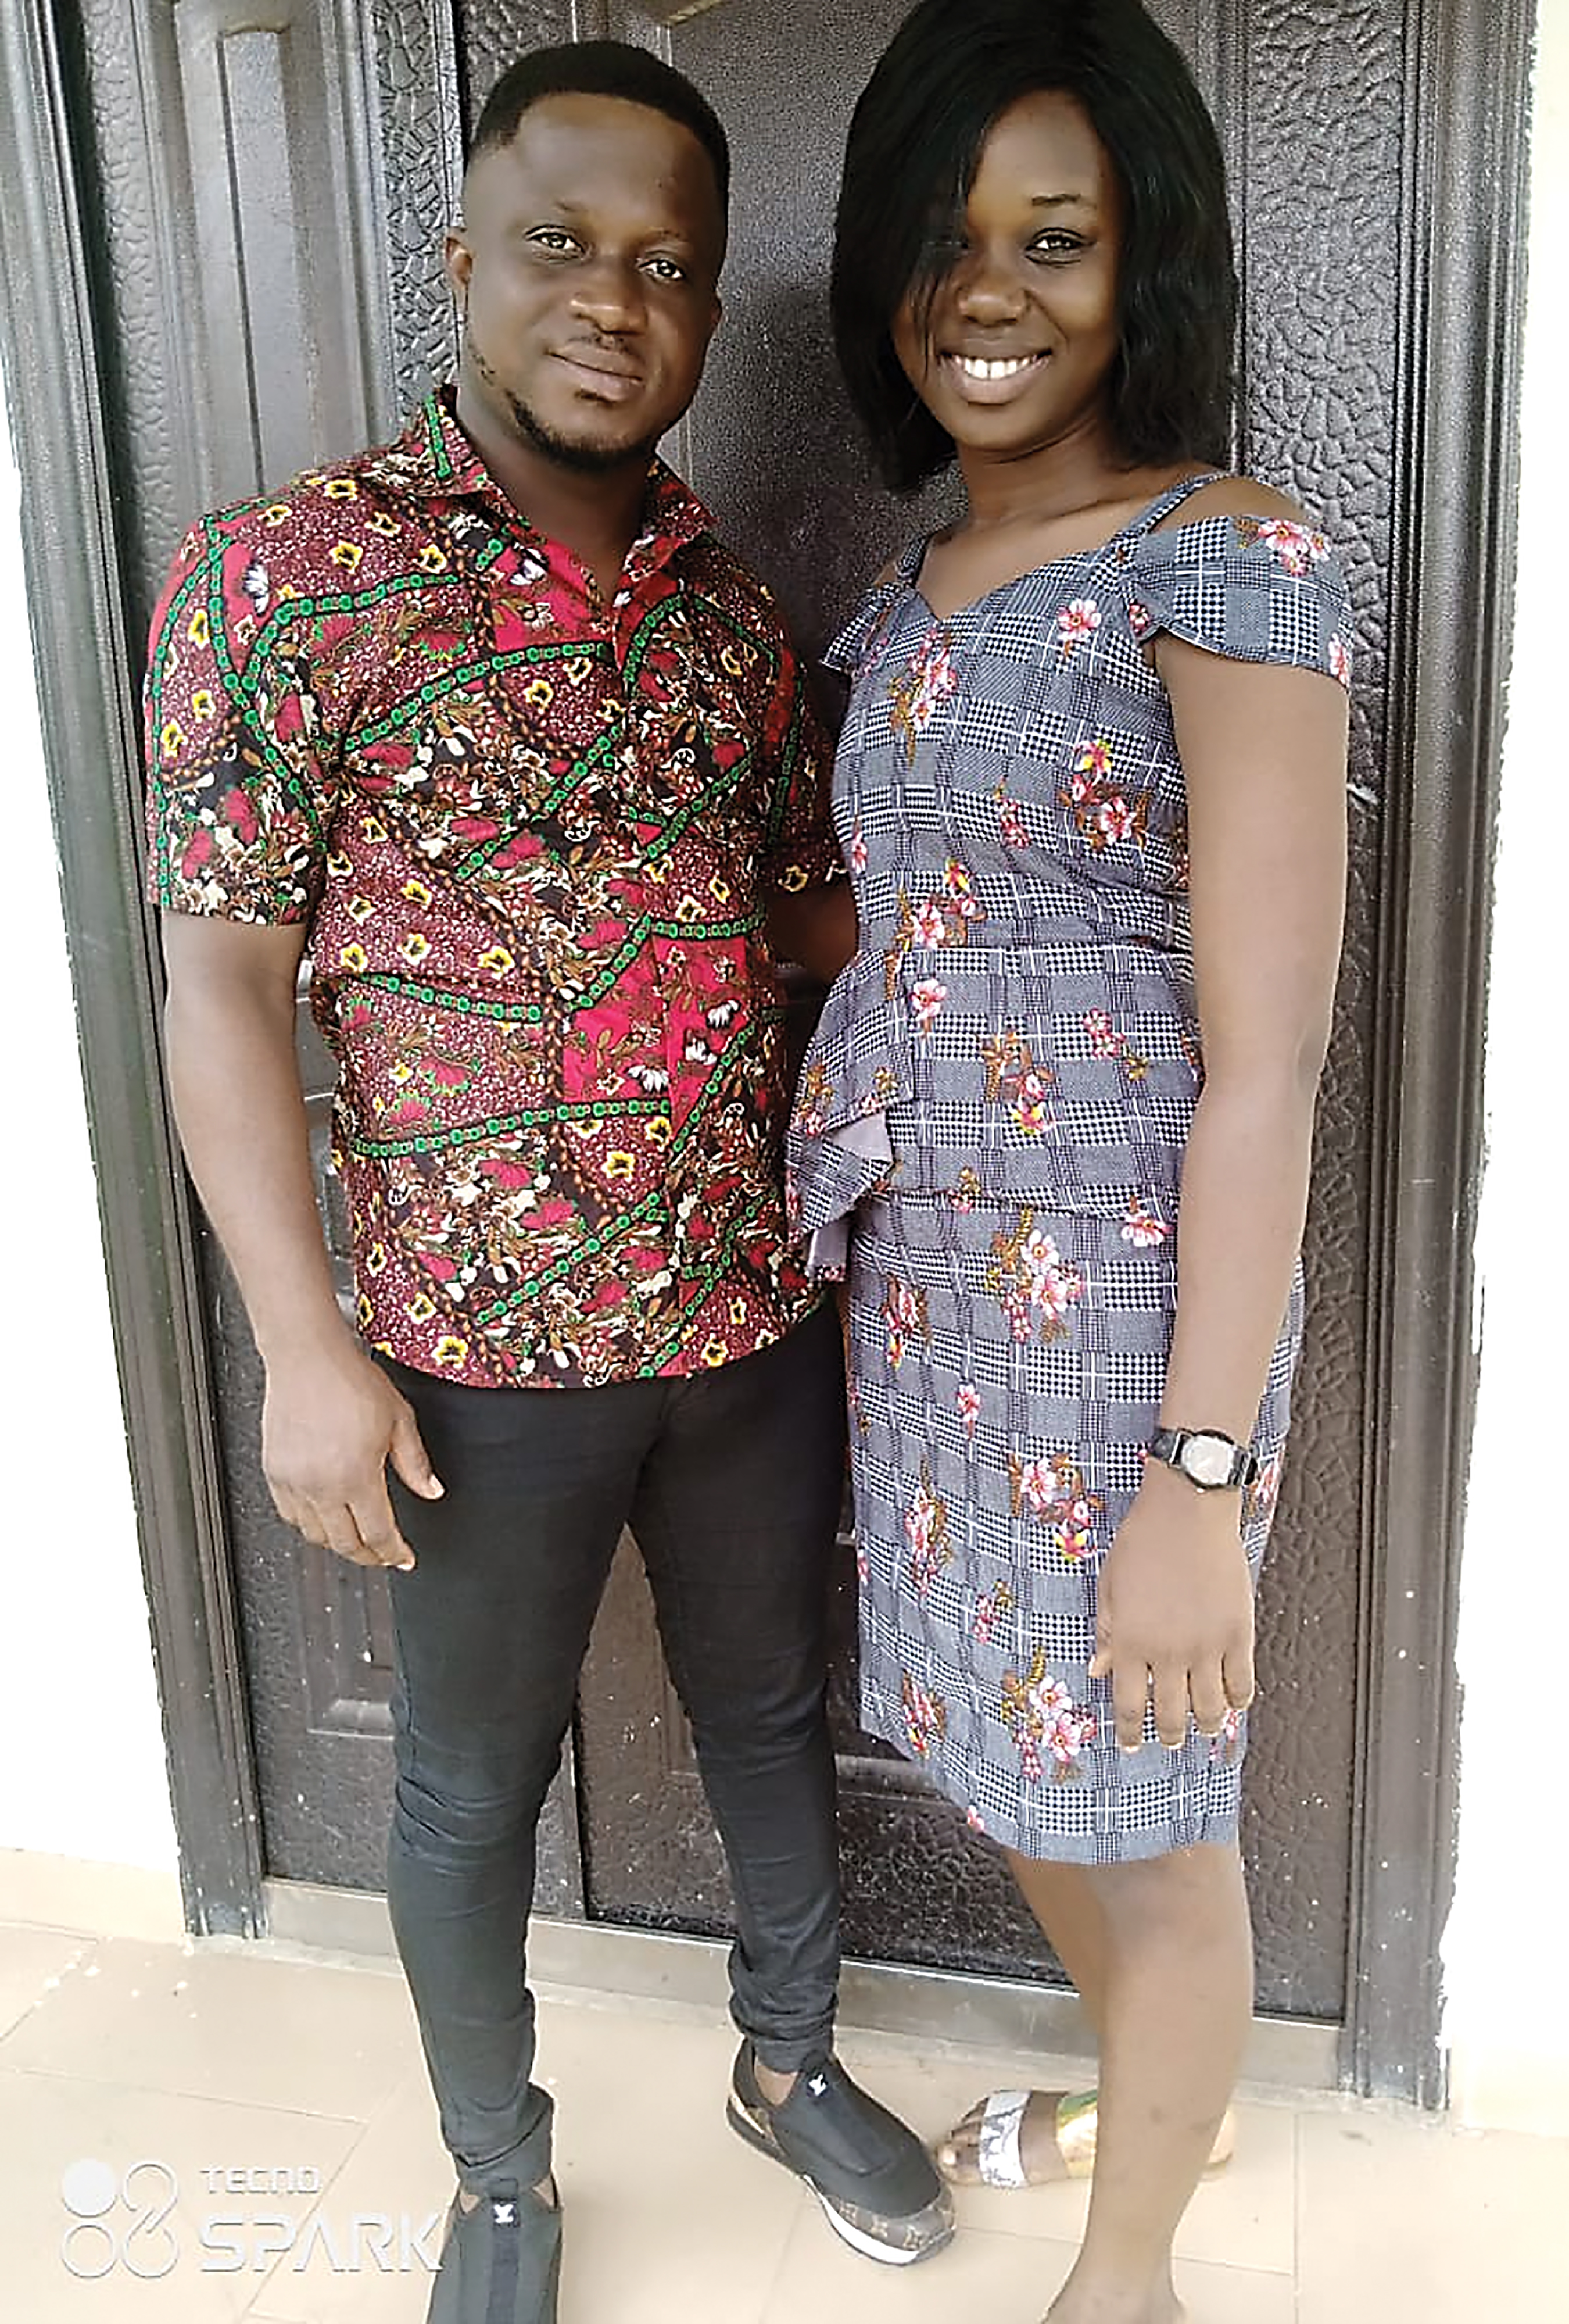 Antwi is engaged to his fiance, Edith and has his own business. Antwi’s business, Tomasani Enterprise, imports Nigerian fabric to Ghana and sells it to local tailors and wholesale distributors.